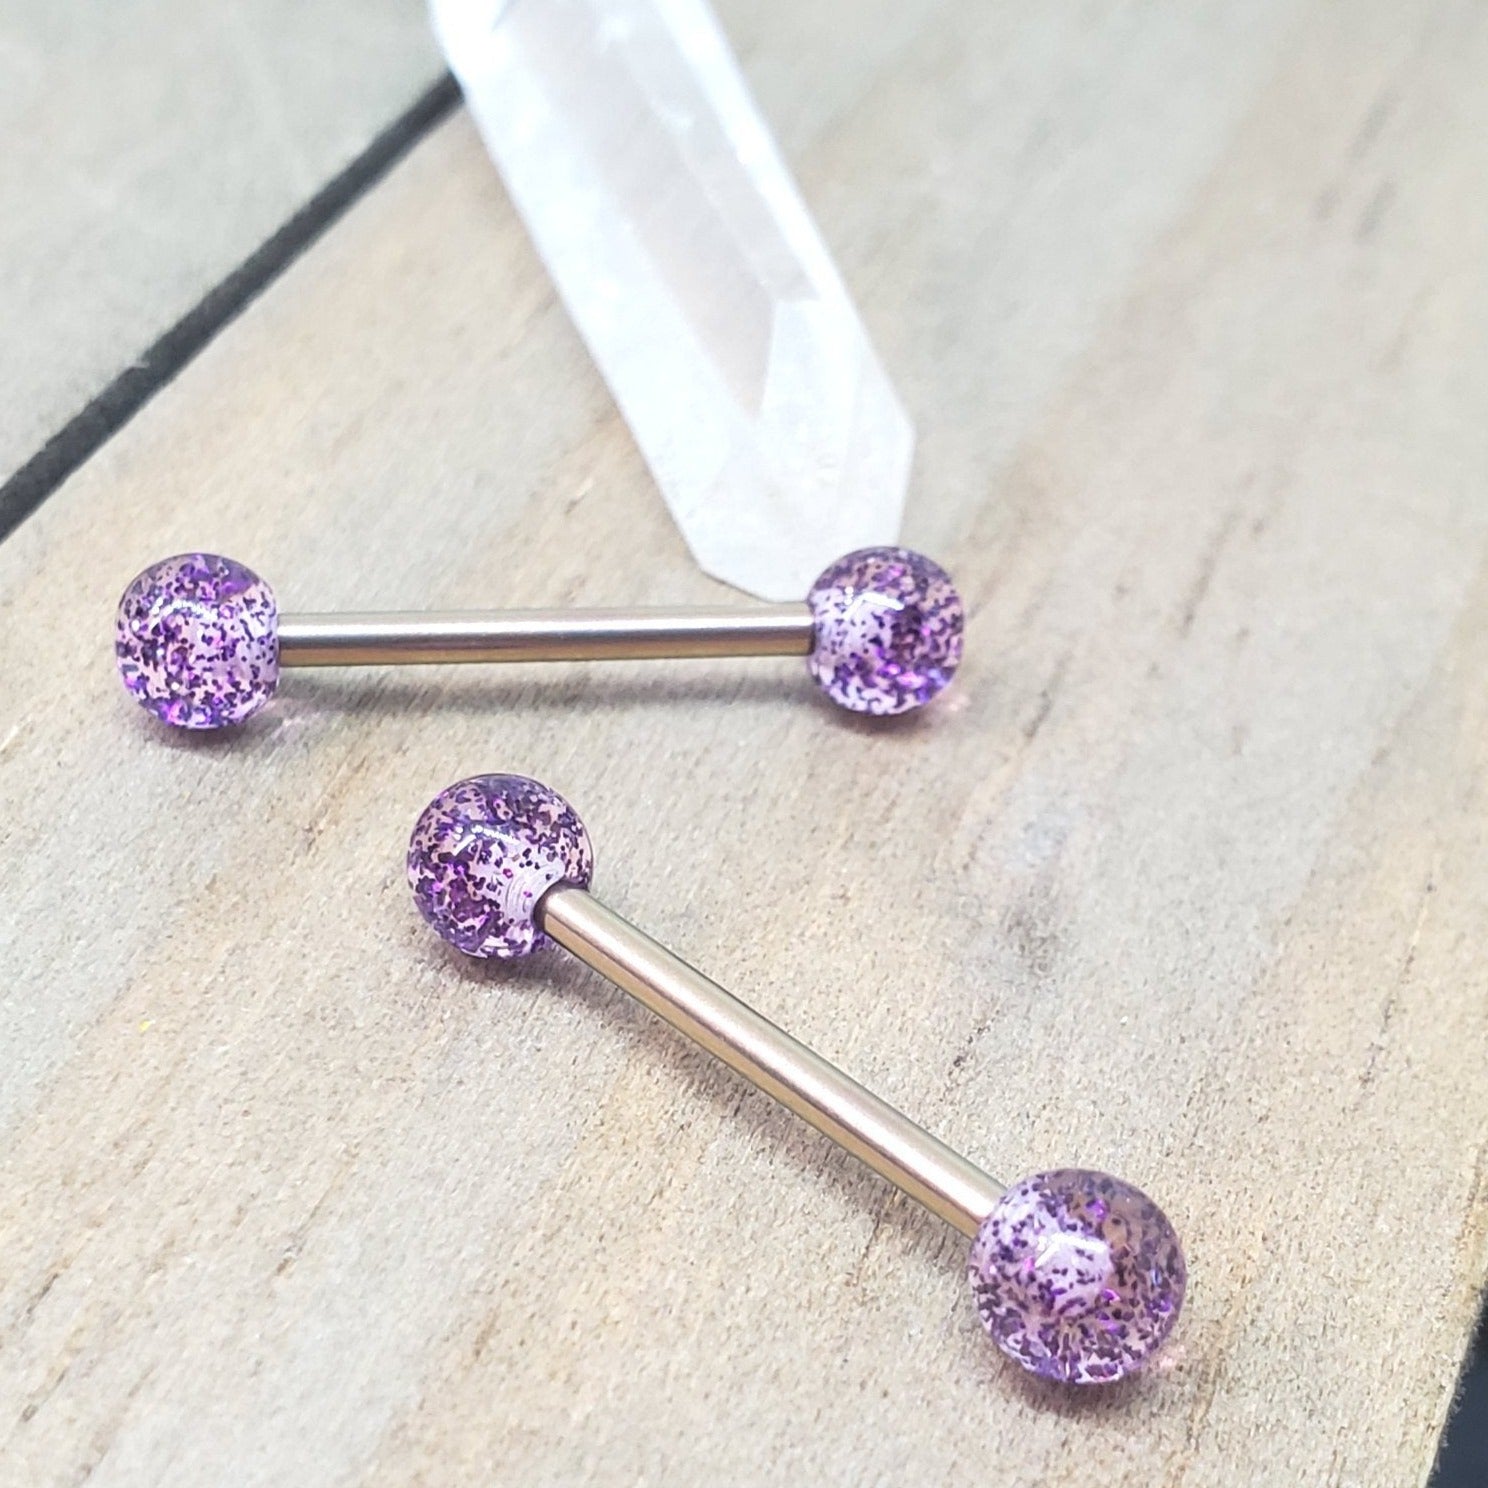 rose gold anodized purple glitter ball end nipple piercing barbell rings